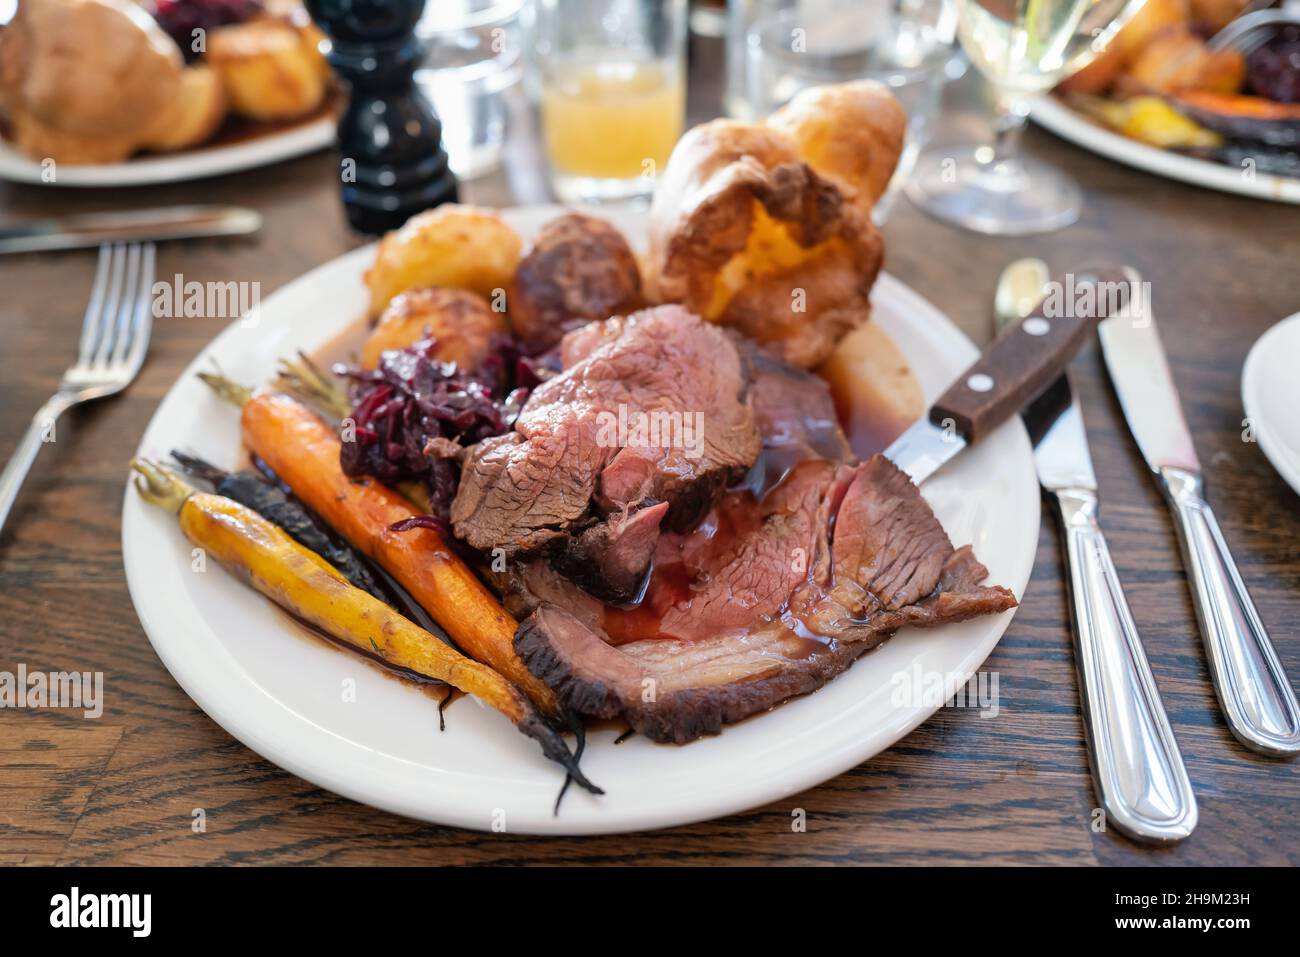 Roast beef on a white plate with roast potatoes and Yorkshire pudding with vegetables in a restaurant. Stock Photo